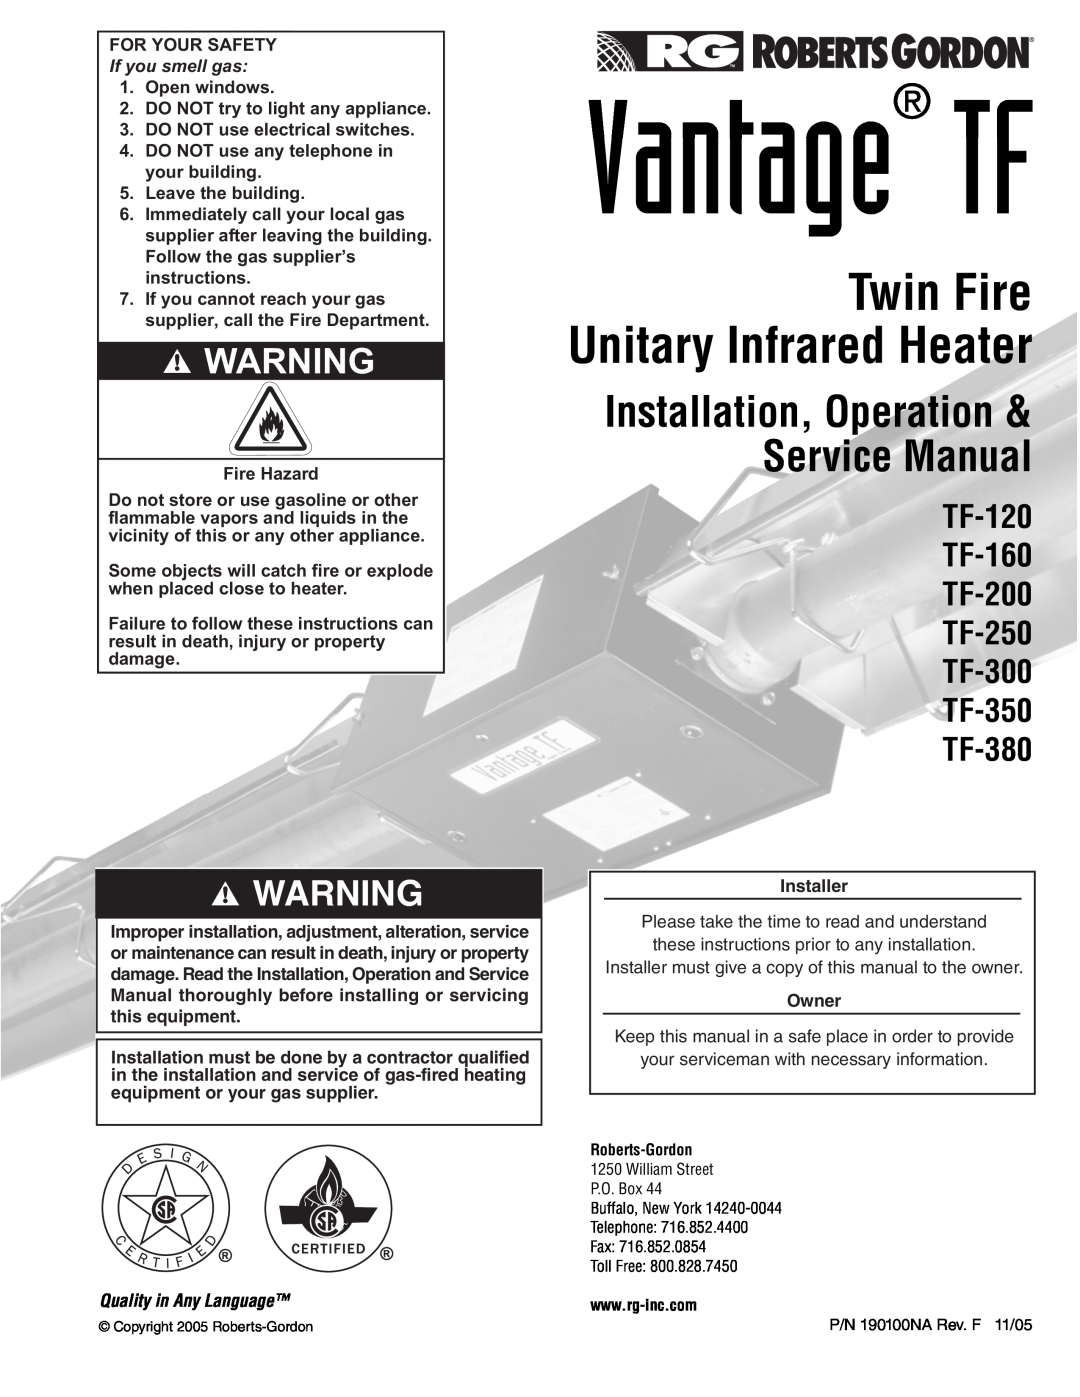 Roberts Gorden TF-300, TF-350, TF-120, TF-200 service manual Vantage TF, Twin Fire Unitary Infrared Heater, If you smell gas 